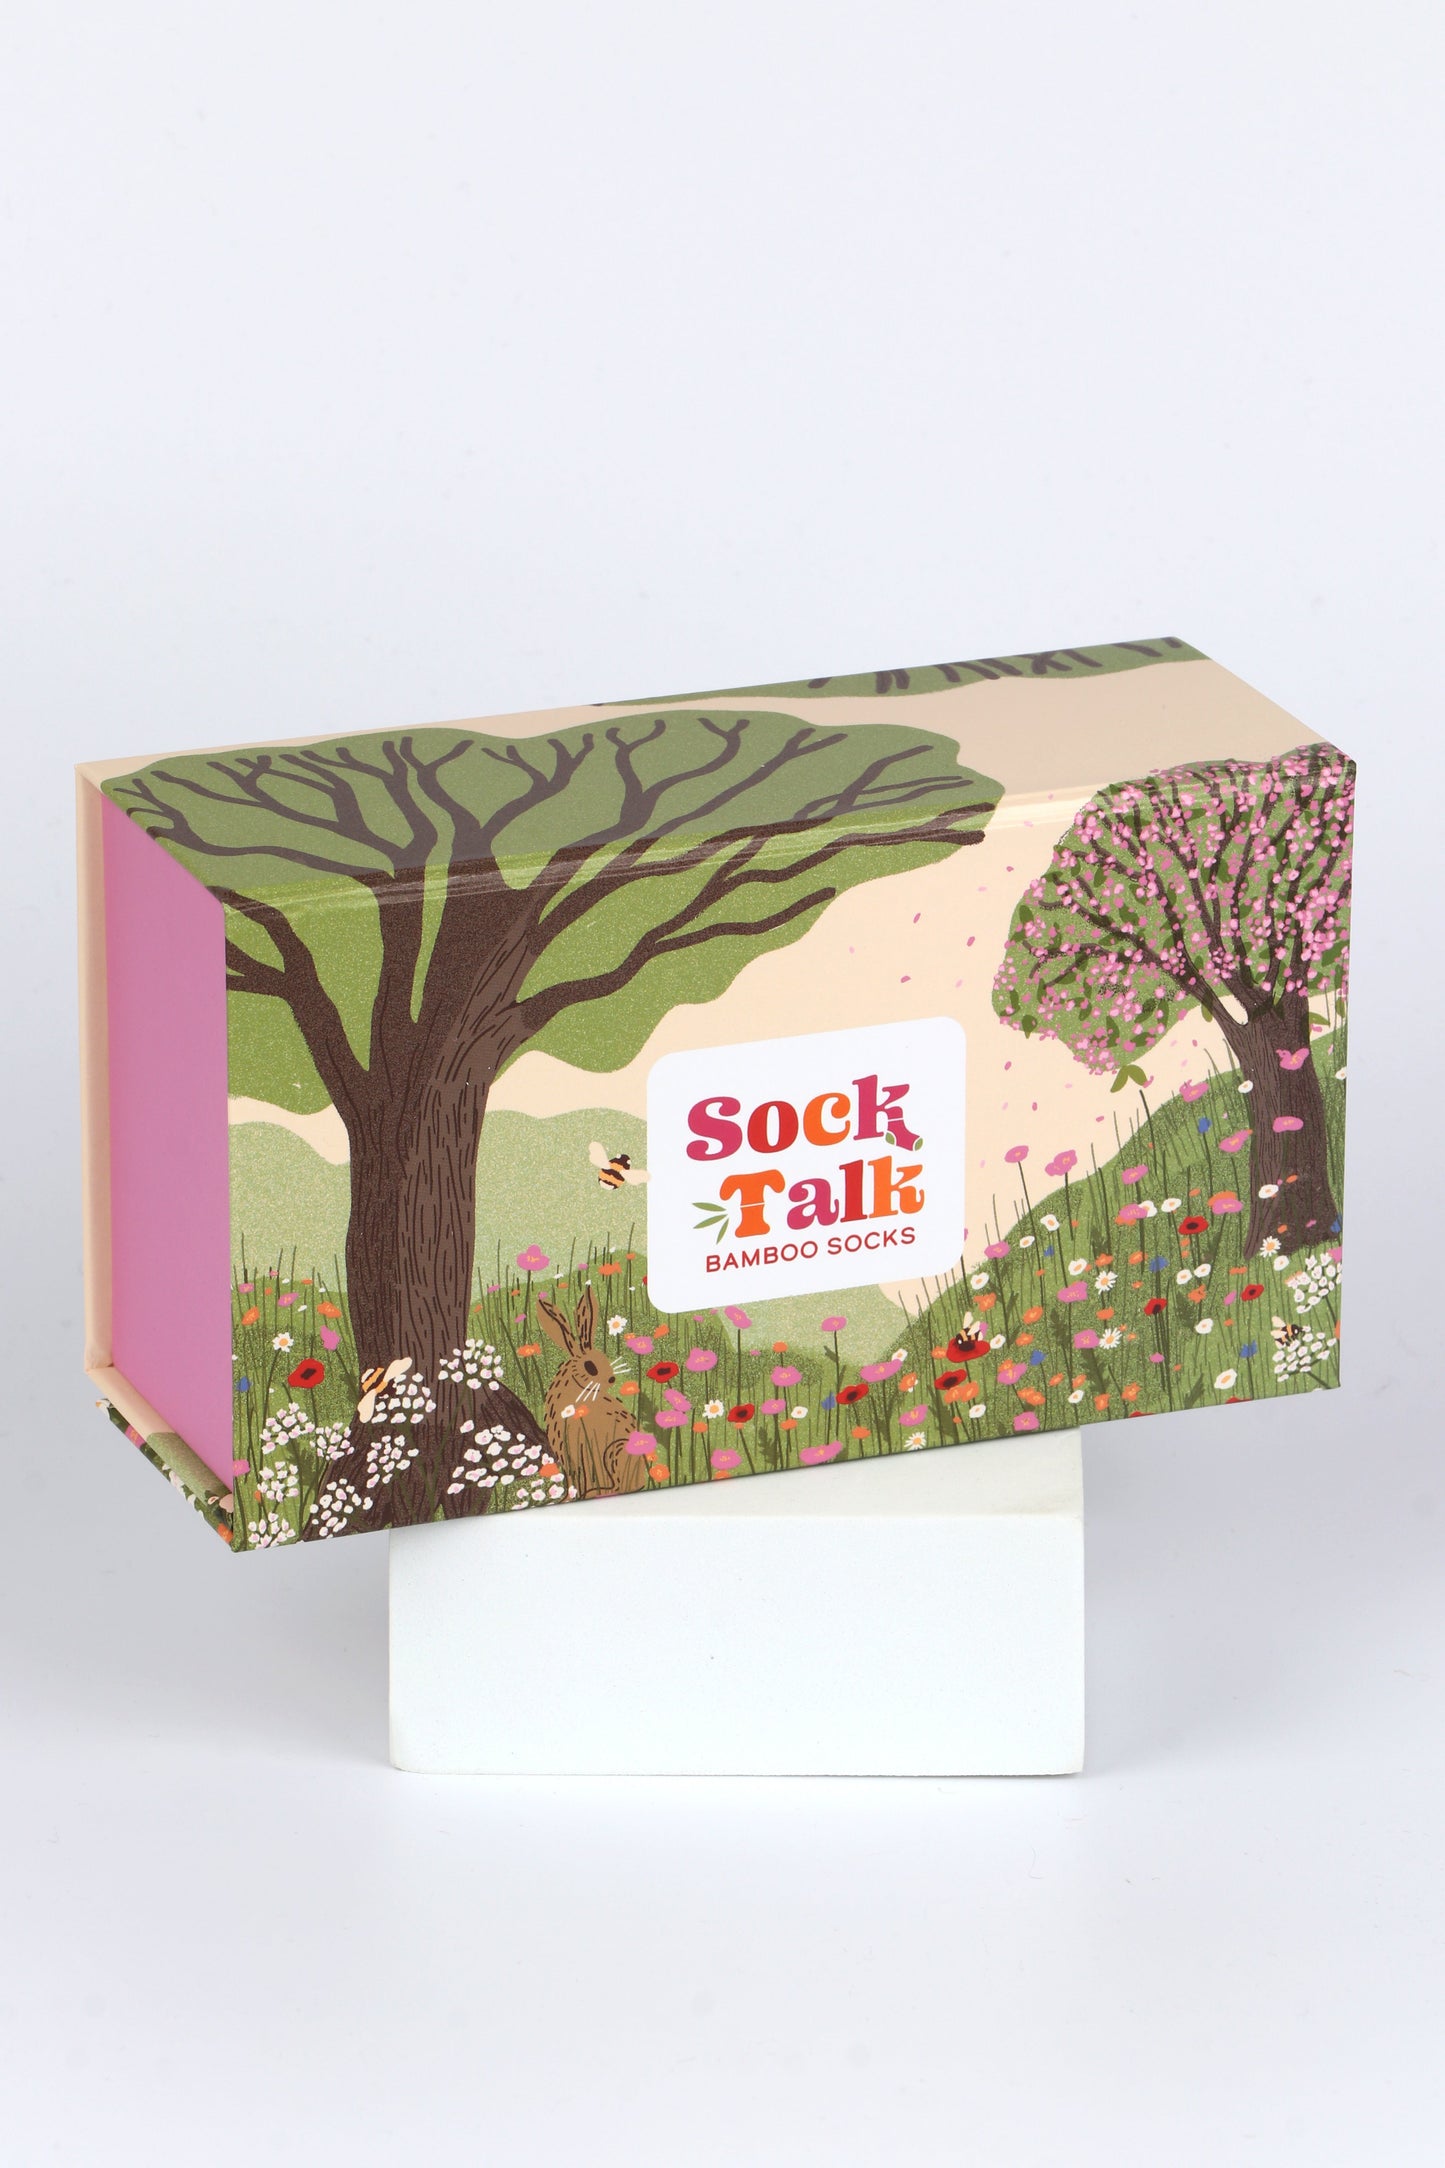 a sock gift box designed to look like a woodland meadow in summer, with flowers, bees and cherry blossom trees